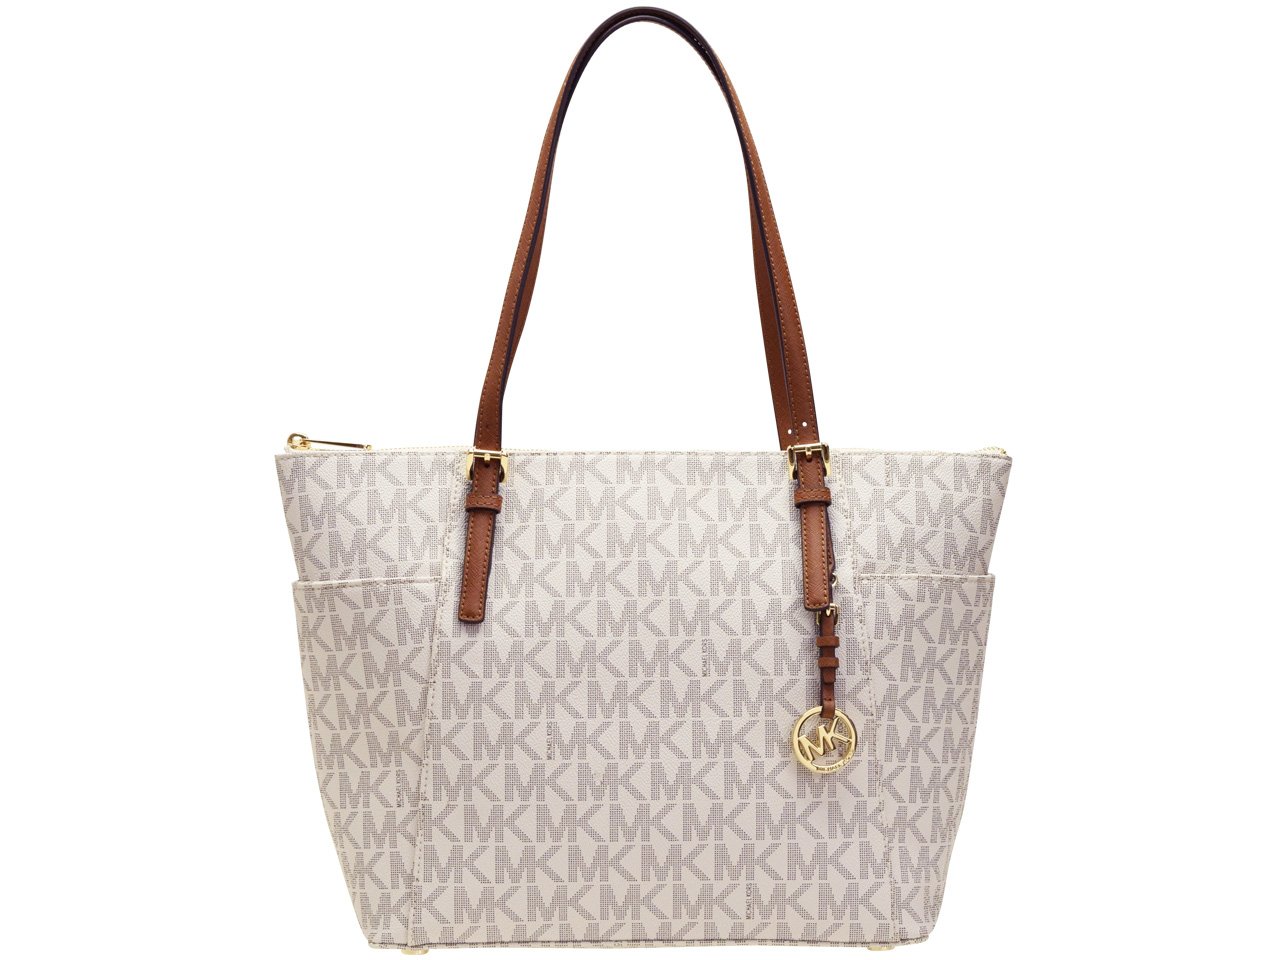 MICHAEL KORS tote bags for woman  Natural  Michael Kors tote bags  30S3S3GT3J online on GIGLIOCOM